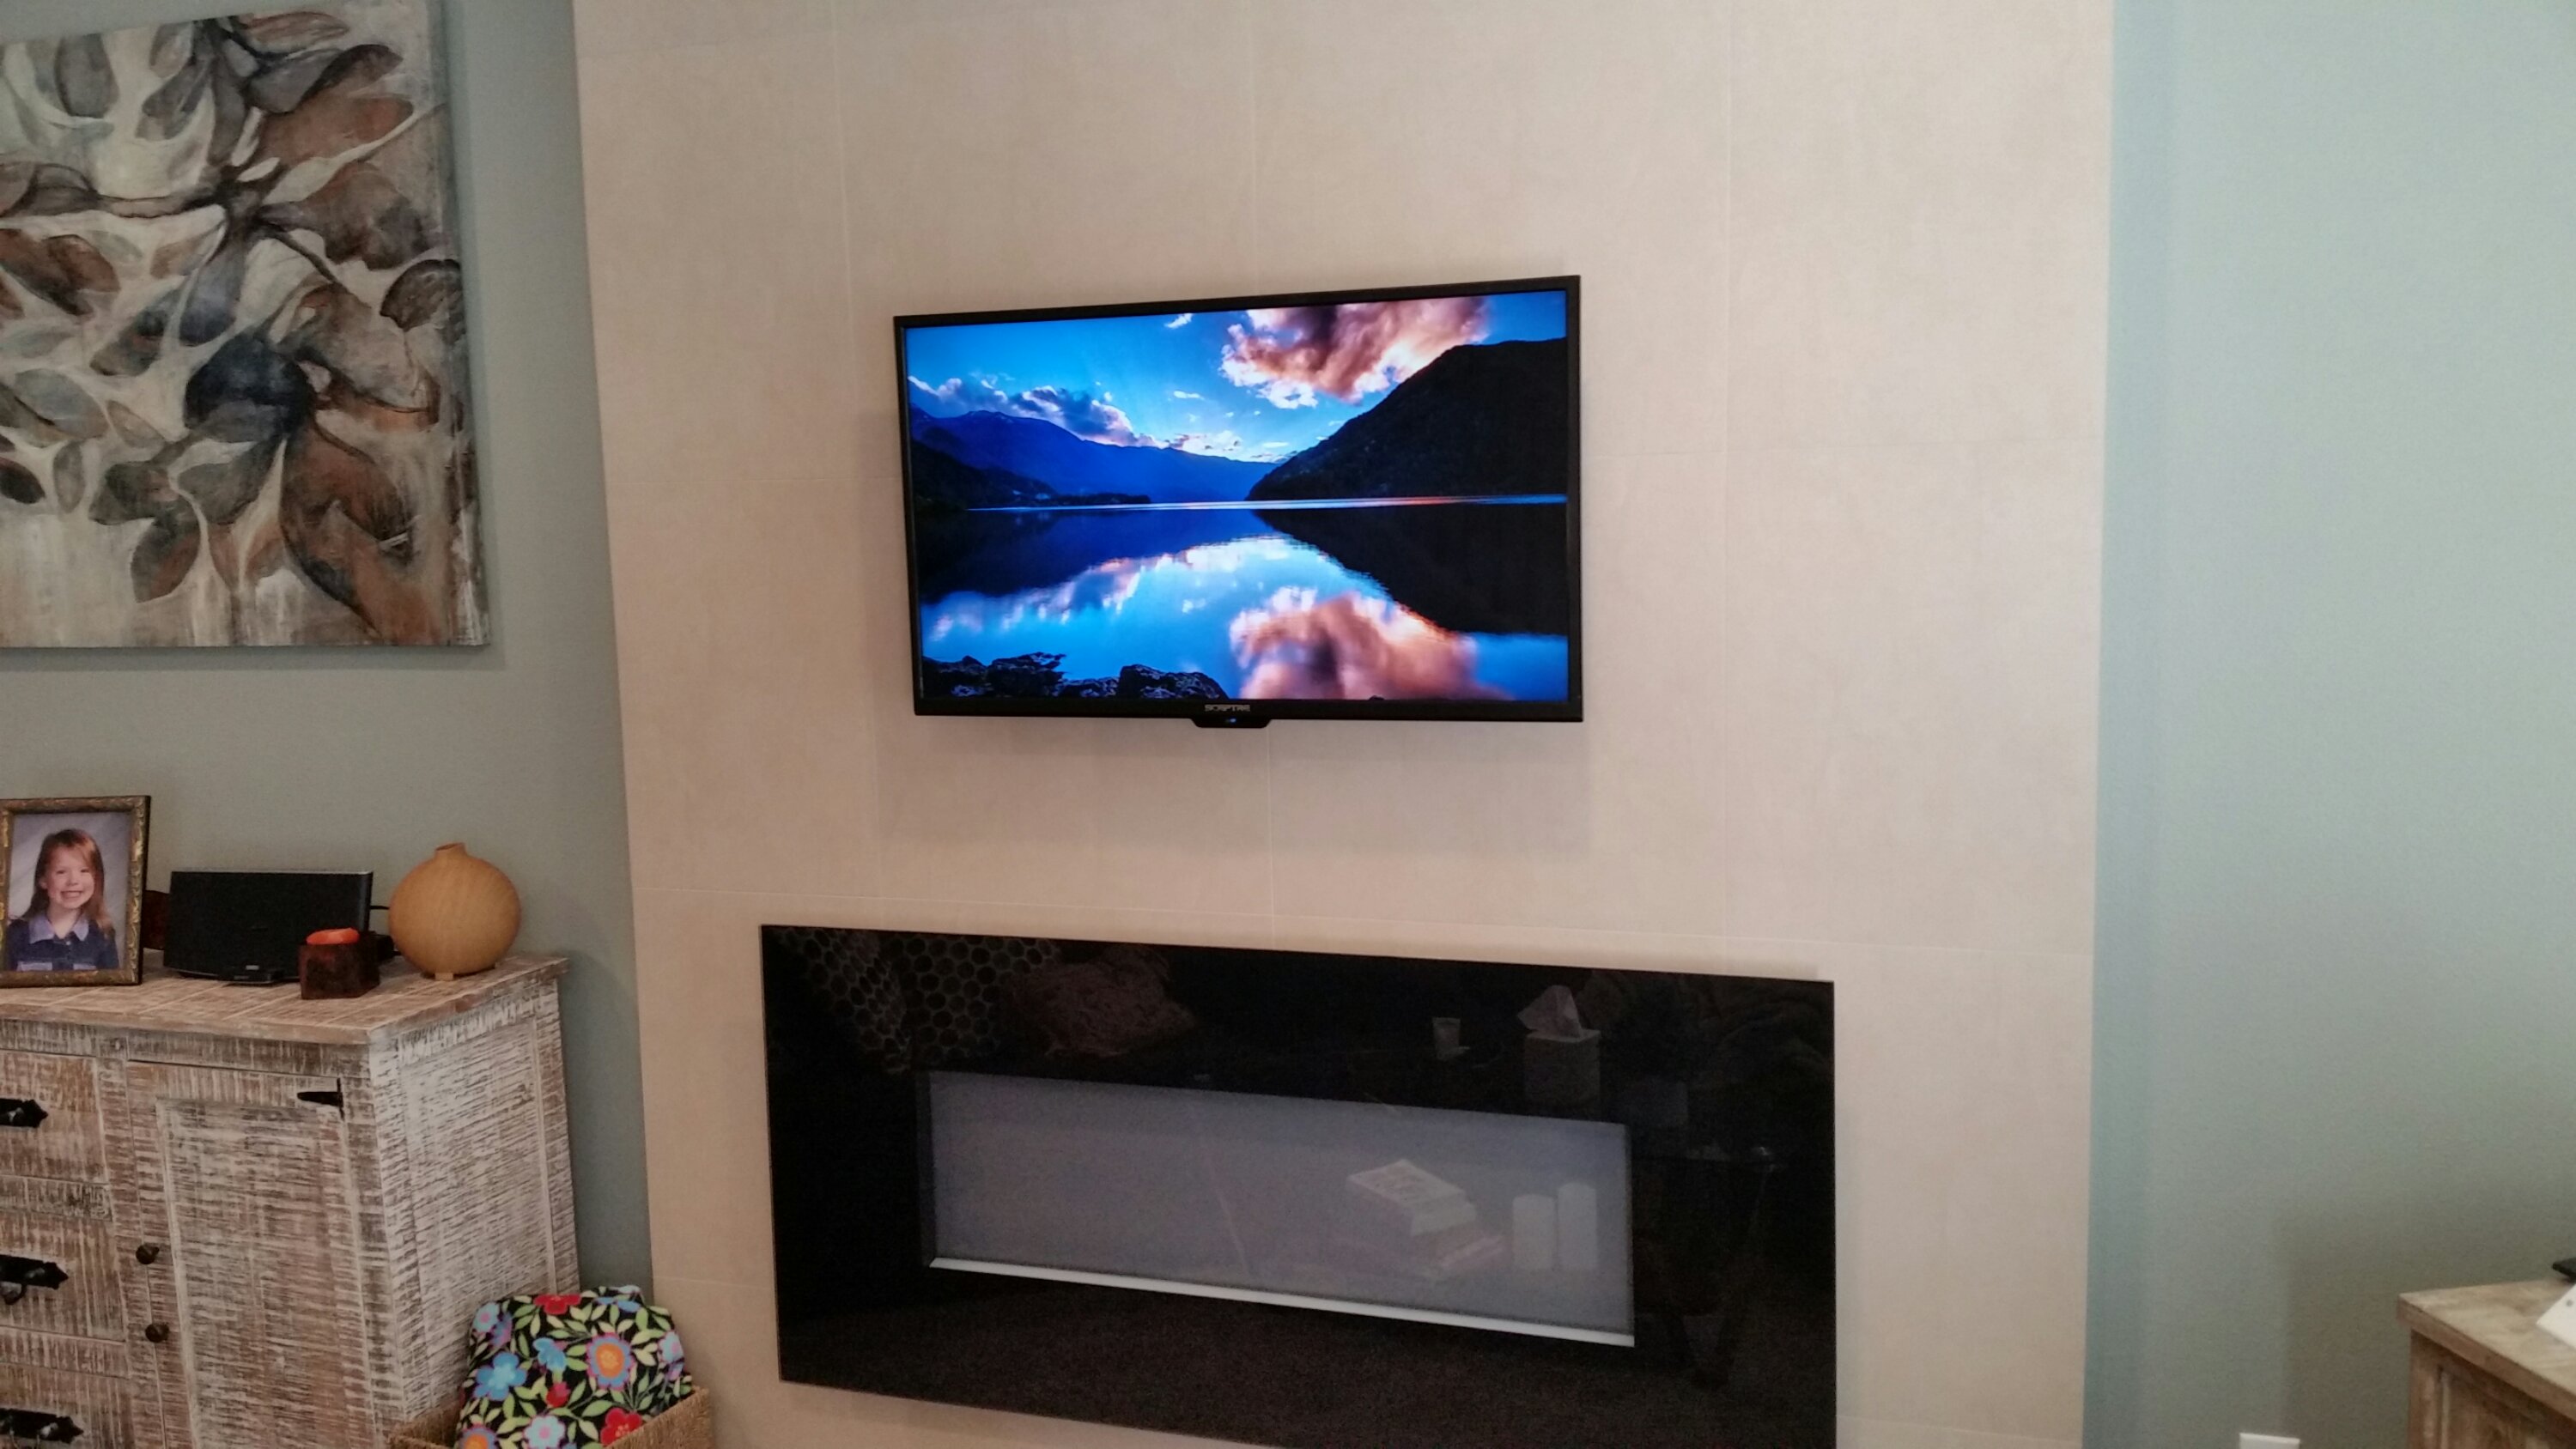 TV Wall Mount with Cord Cover Services - Hedgehog Home Services, LLC